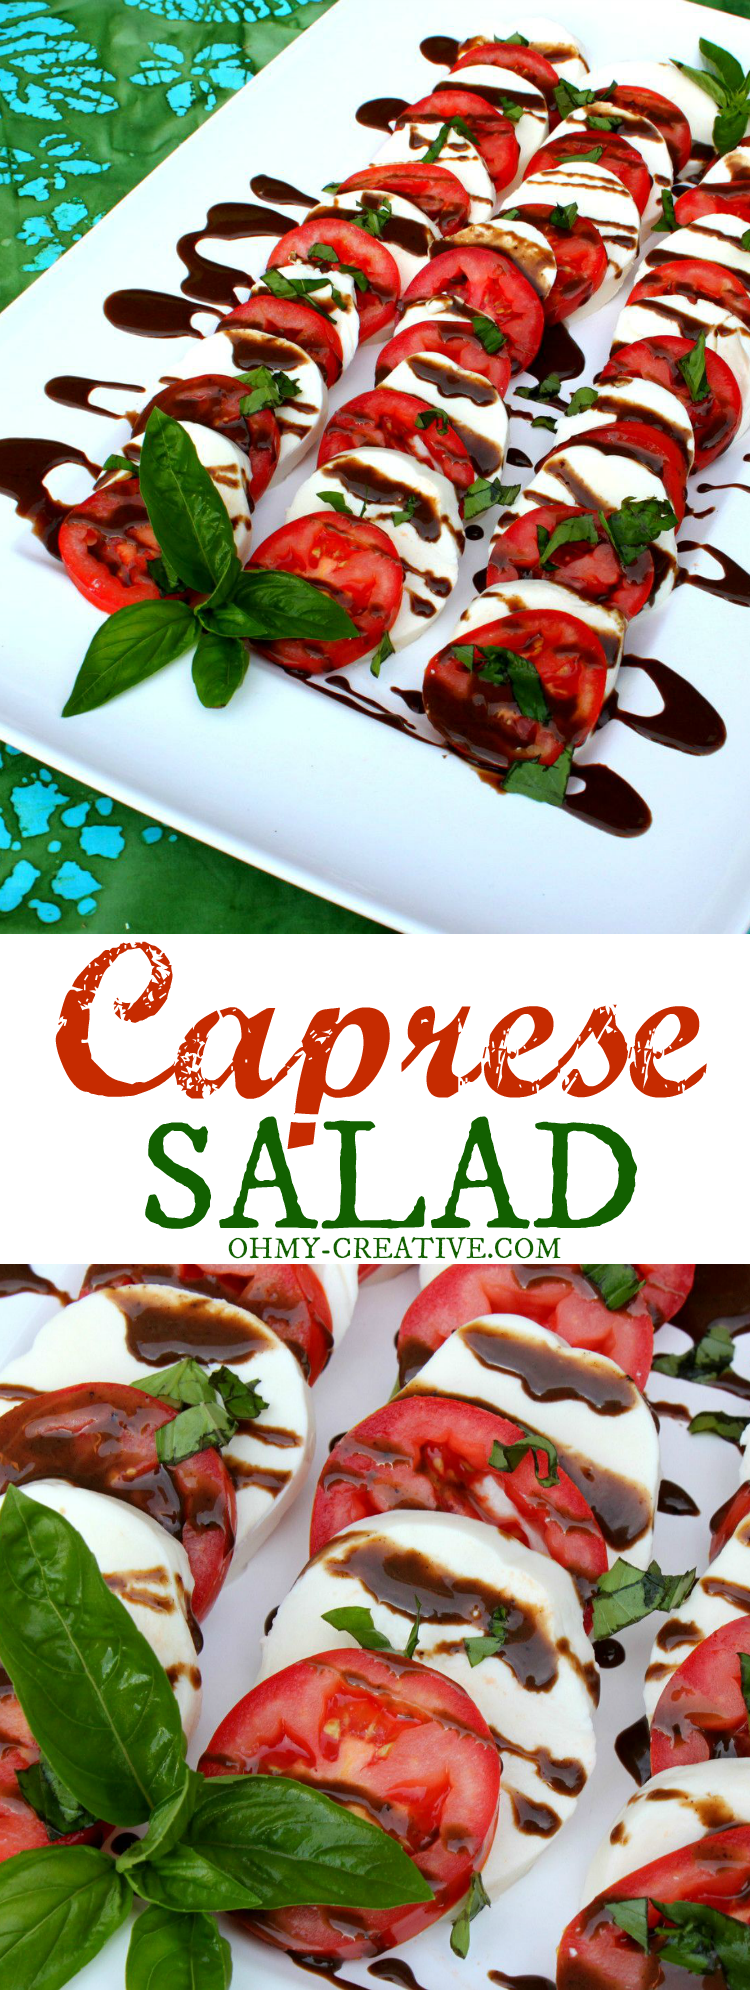 This Caprese Salad Recipe couldn't be easier and it is a great way to use up tomatoes and basil from the garden! So tasty! | OHMY-CREATIVE.COM